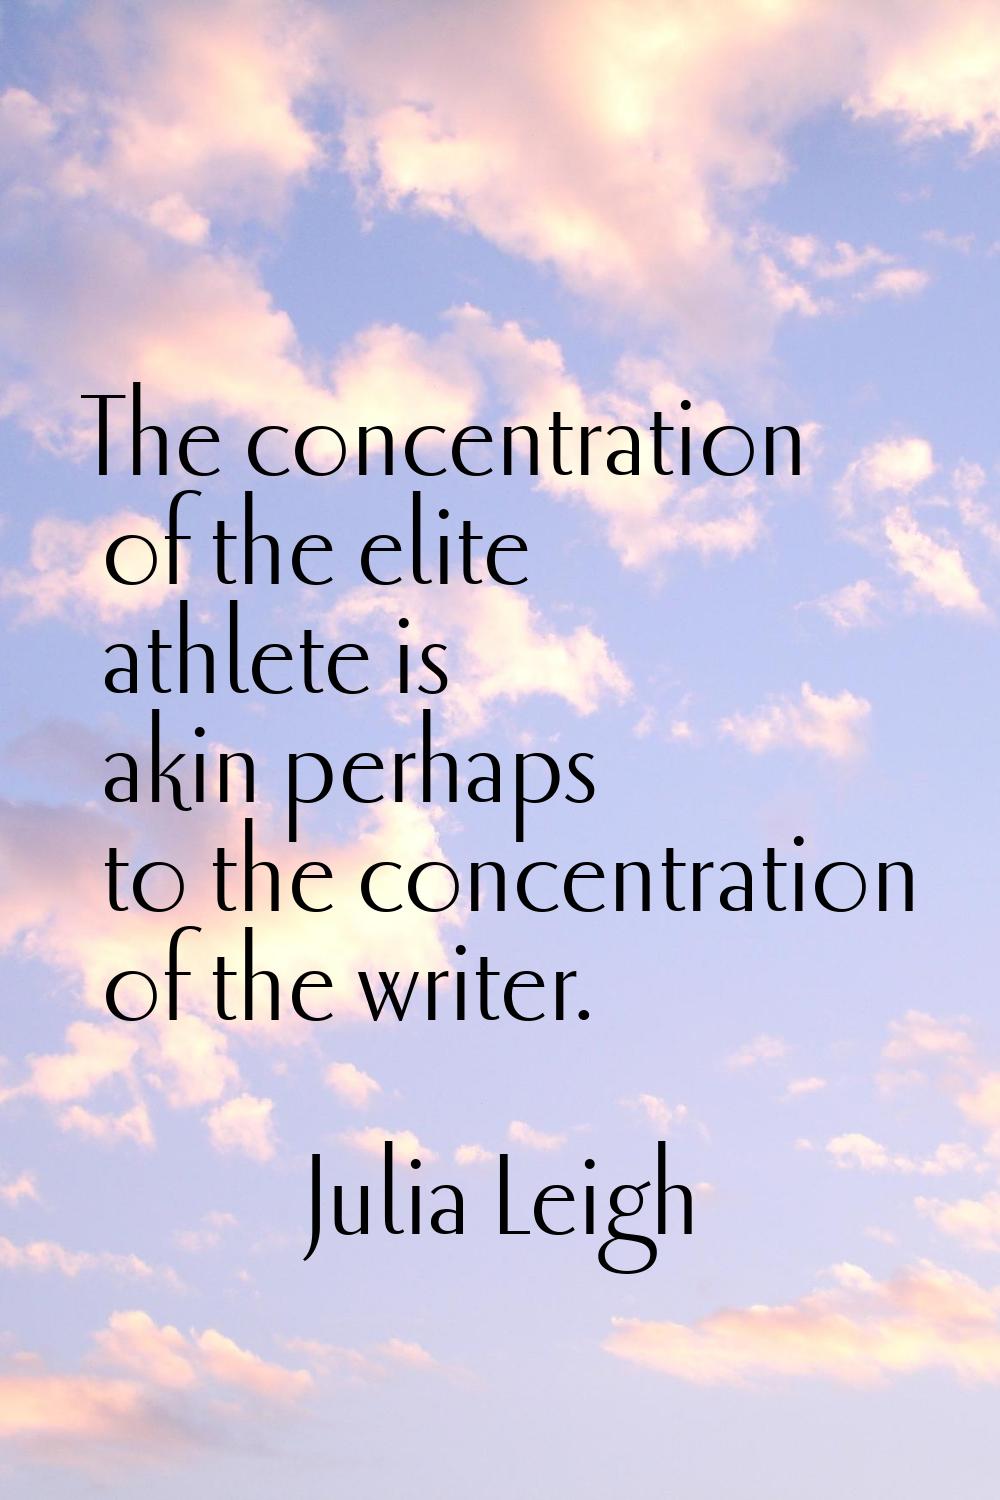 The concentration of the elite athlete is akin perhaps to the concentration of the writer.